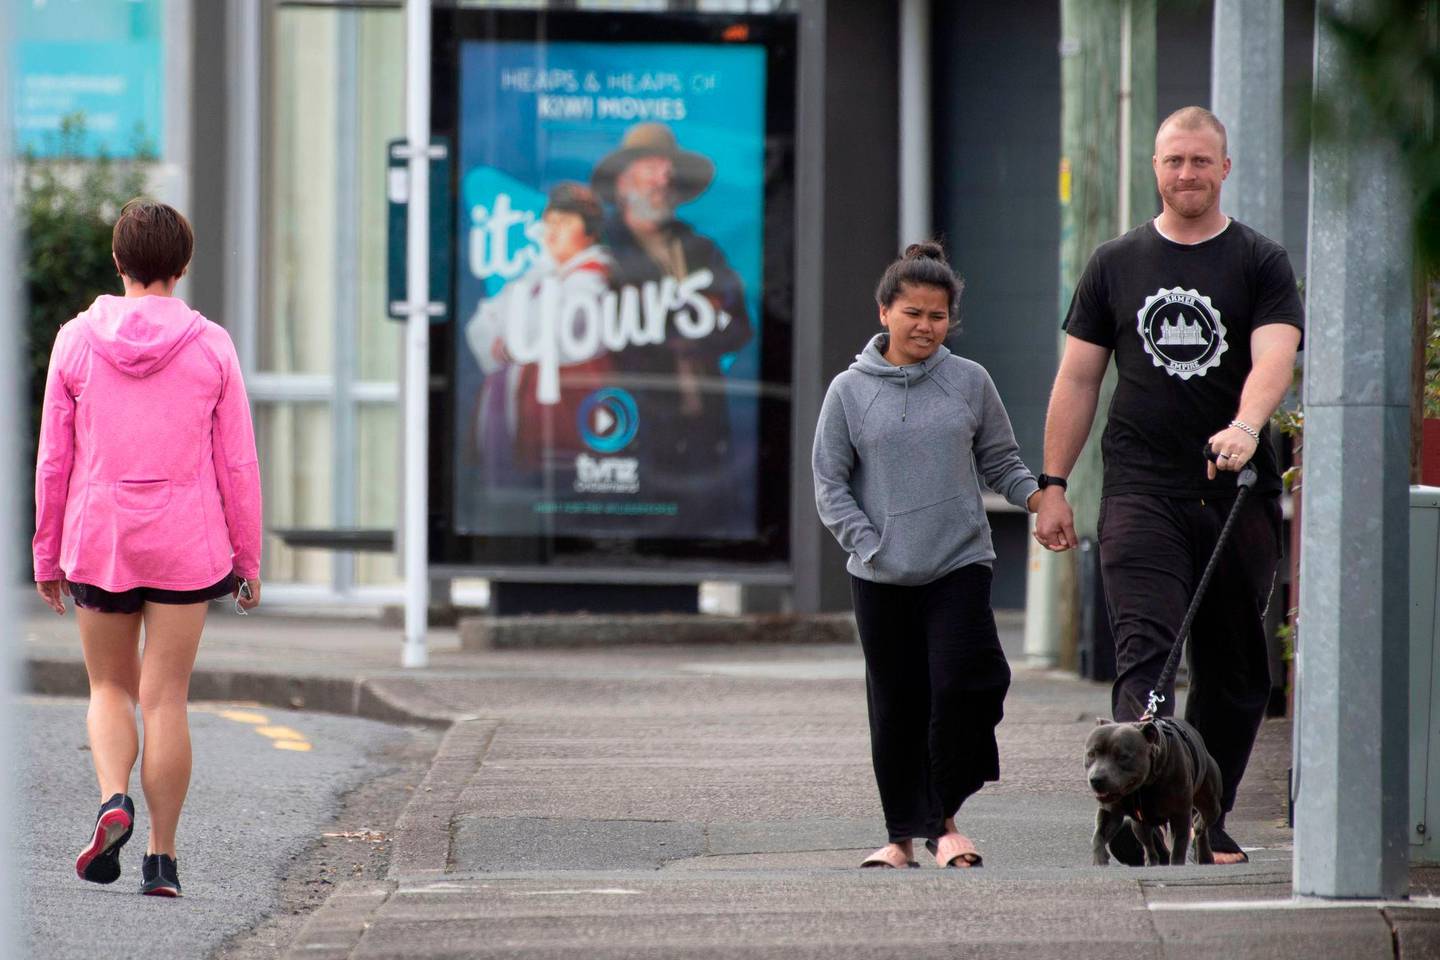 Pedestrians practise social distancing in response to the COVID-19 coronavirus outbreak along a street of Lower Hutt, near Wellington, on April 20, 2020. - New Zealand will ease a nationwide COVID-19 lockdown next week after claiming success in stopping "an uncontrolled explosion" of the virus, Prime Minister Jacinda Ardern said on April 20. (Photo by Marty MELVILLE / AFP)